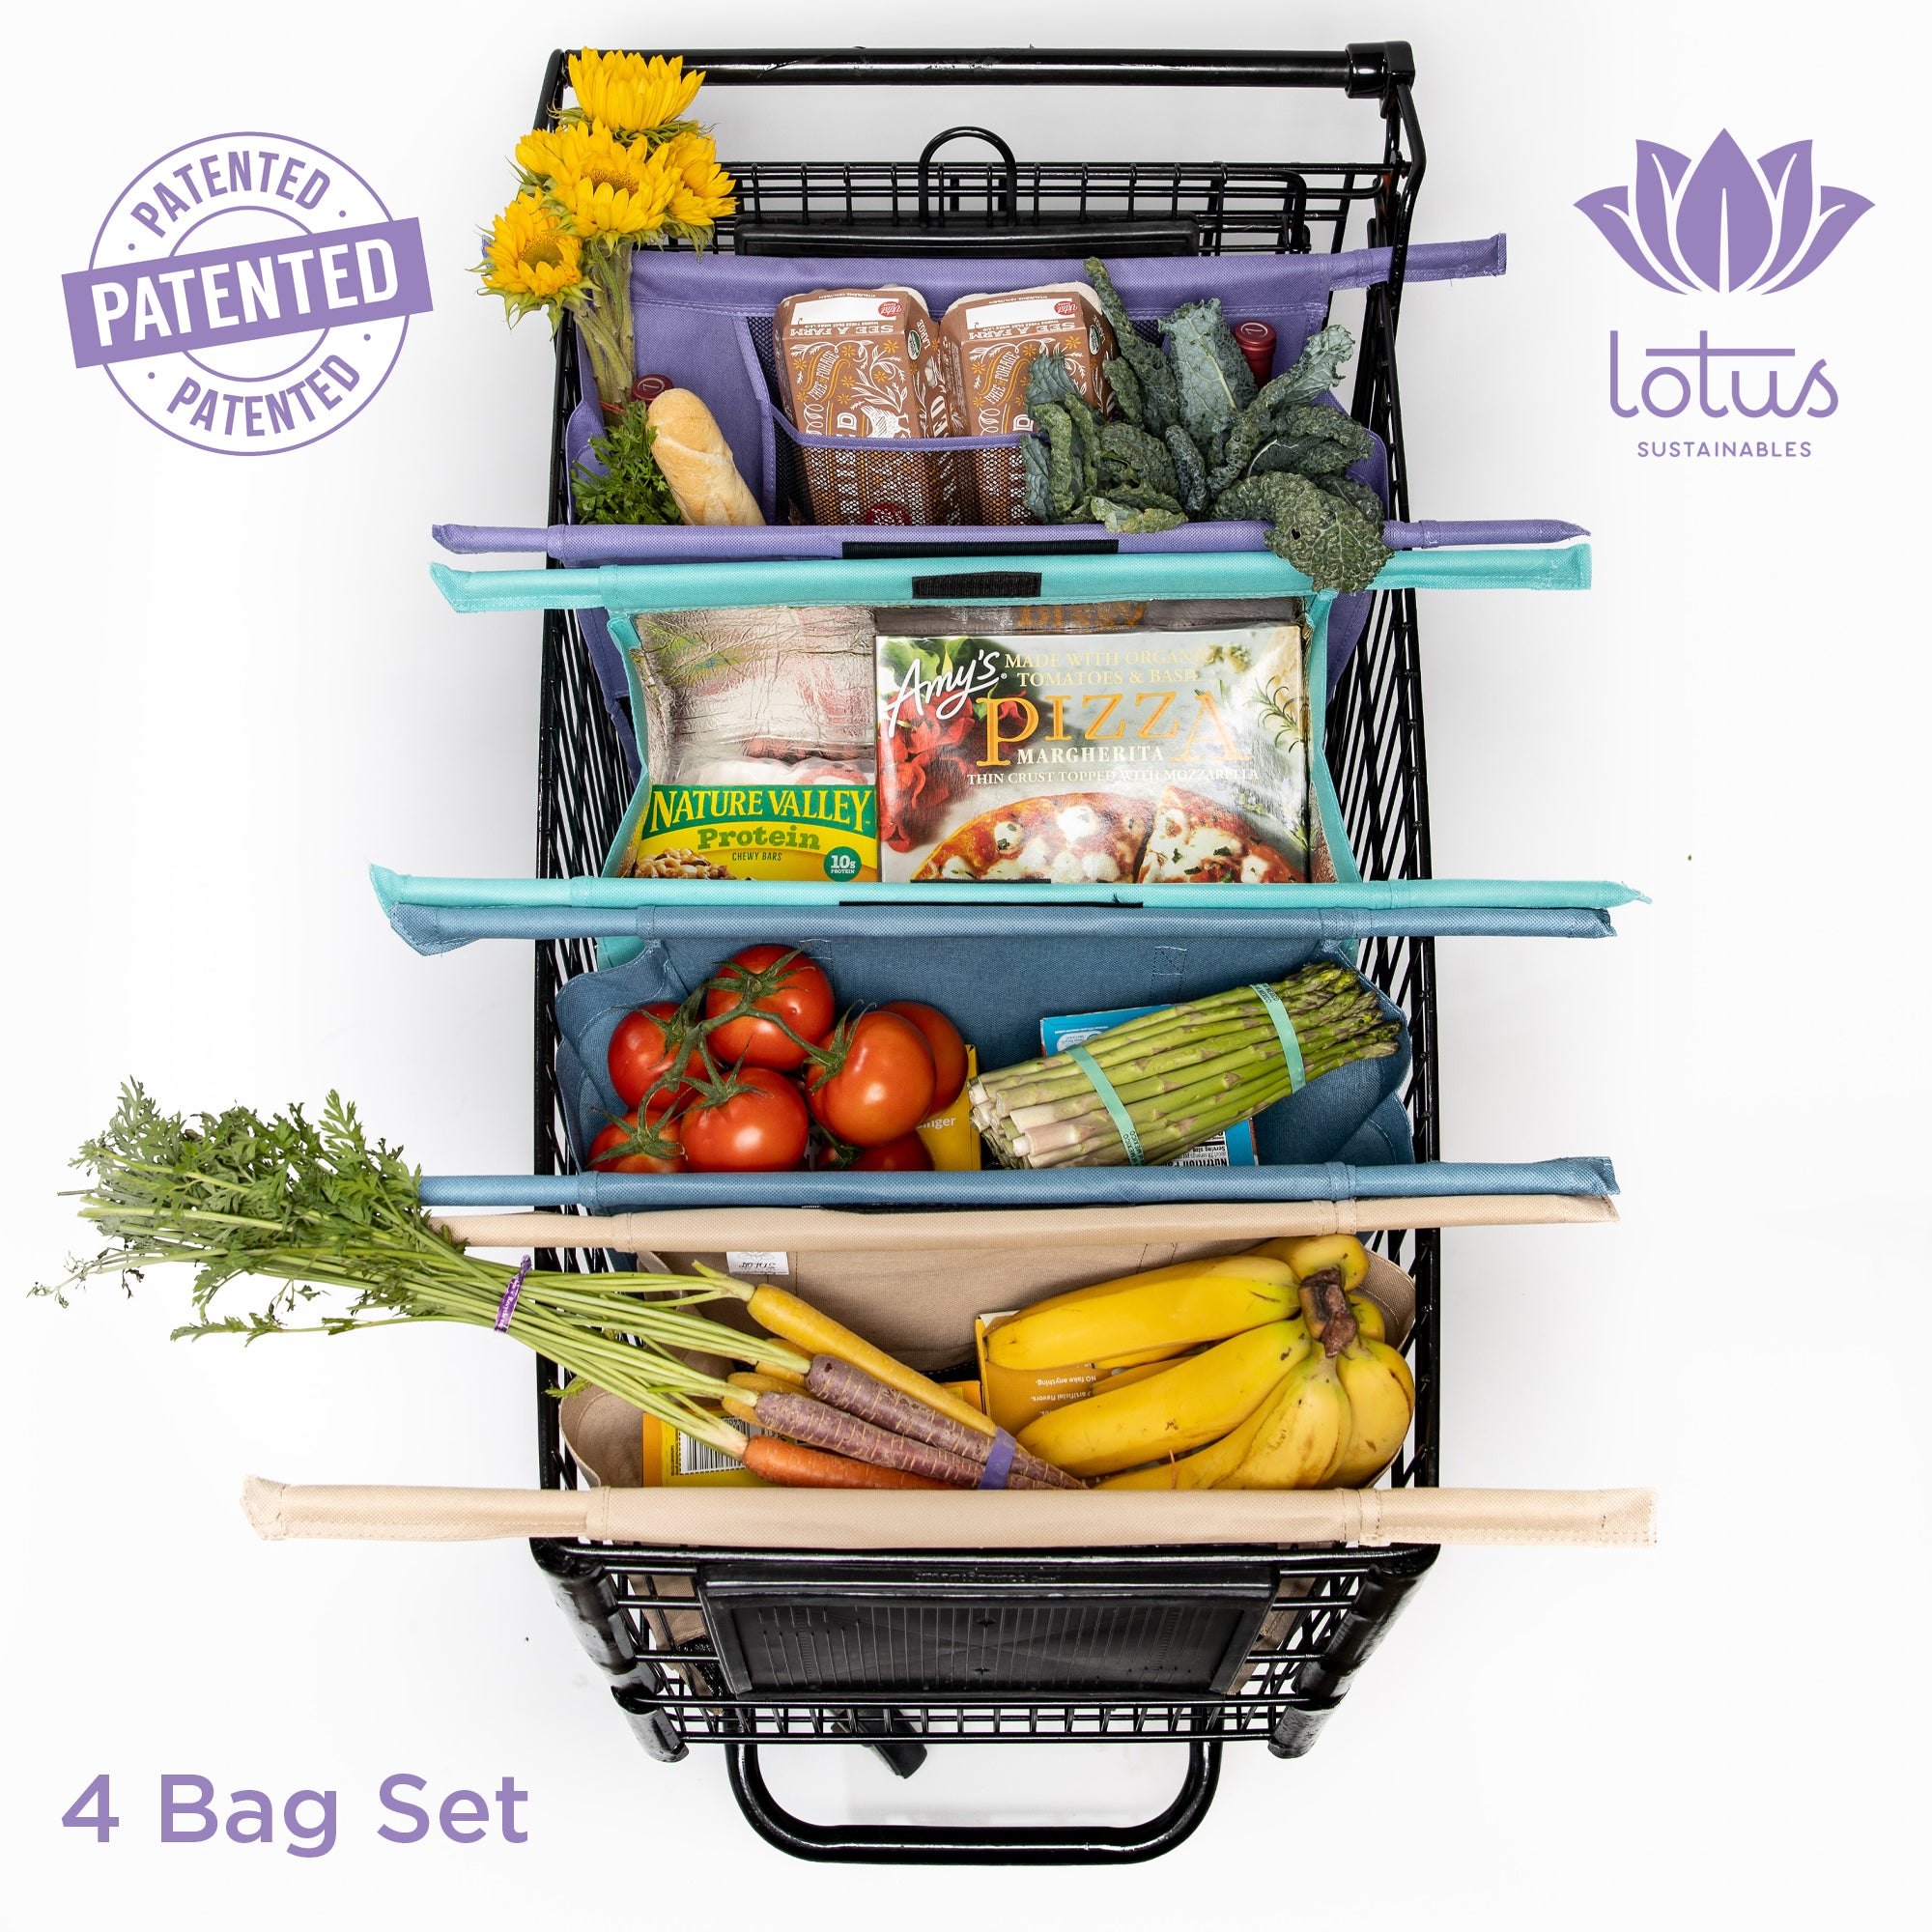 The Complete and Organized Reusable Trolley Bags 🛍 - LOTUS